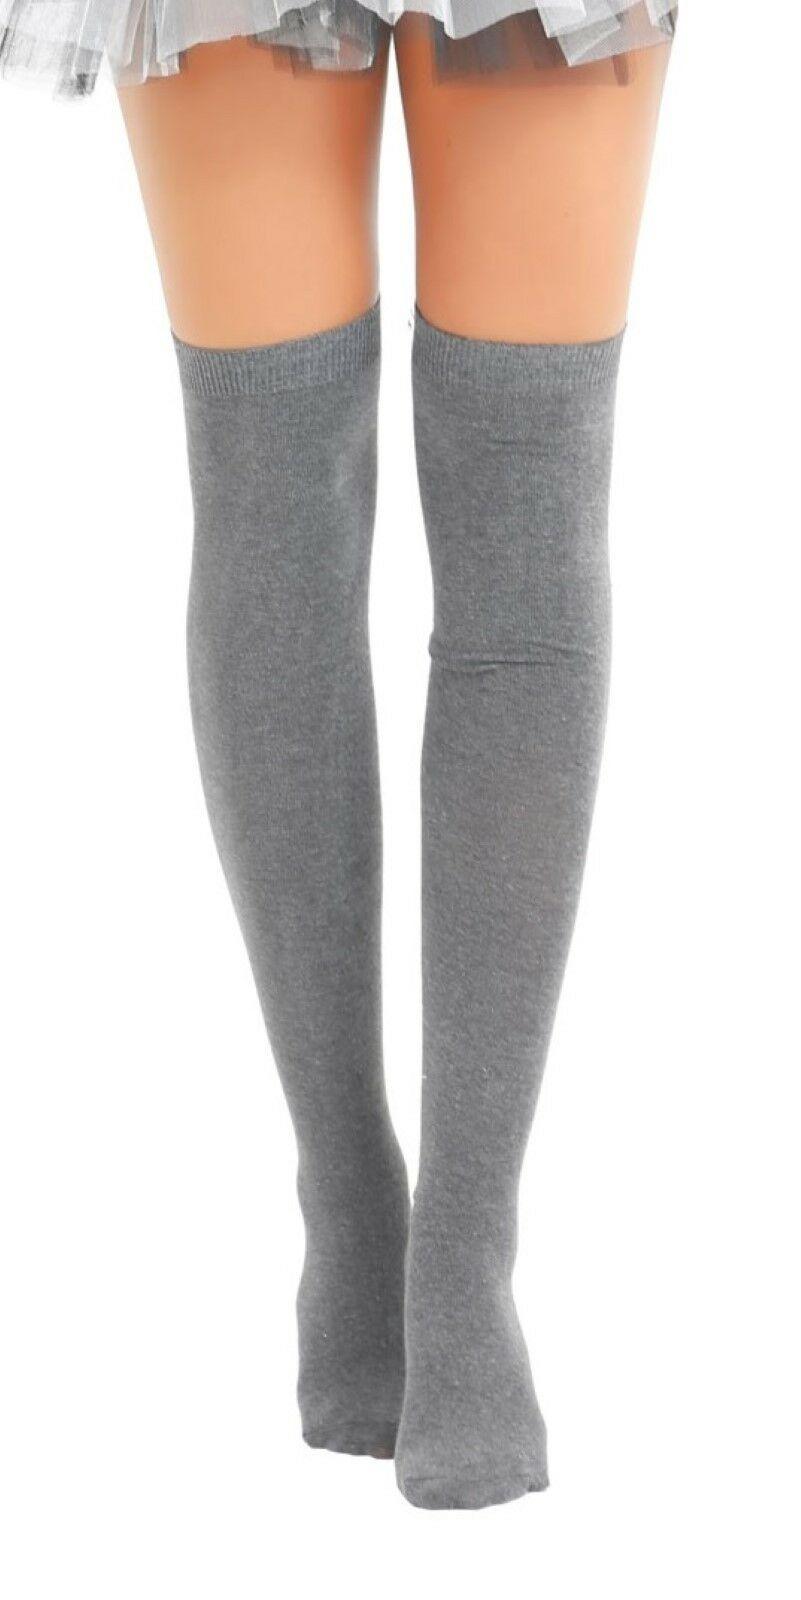 Ladies Plain Lycra Grey Thigh High Girls Stretchy Over the Knee Socks - Labreeze